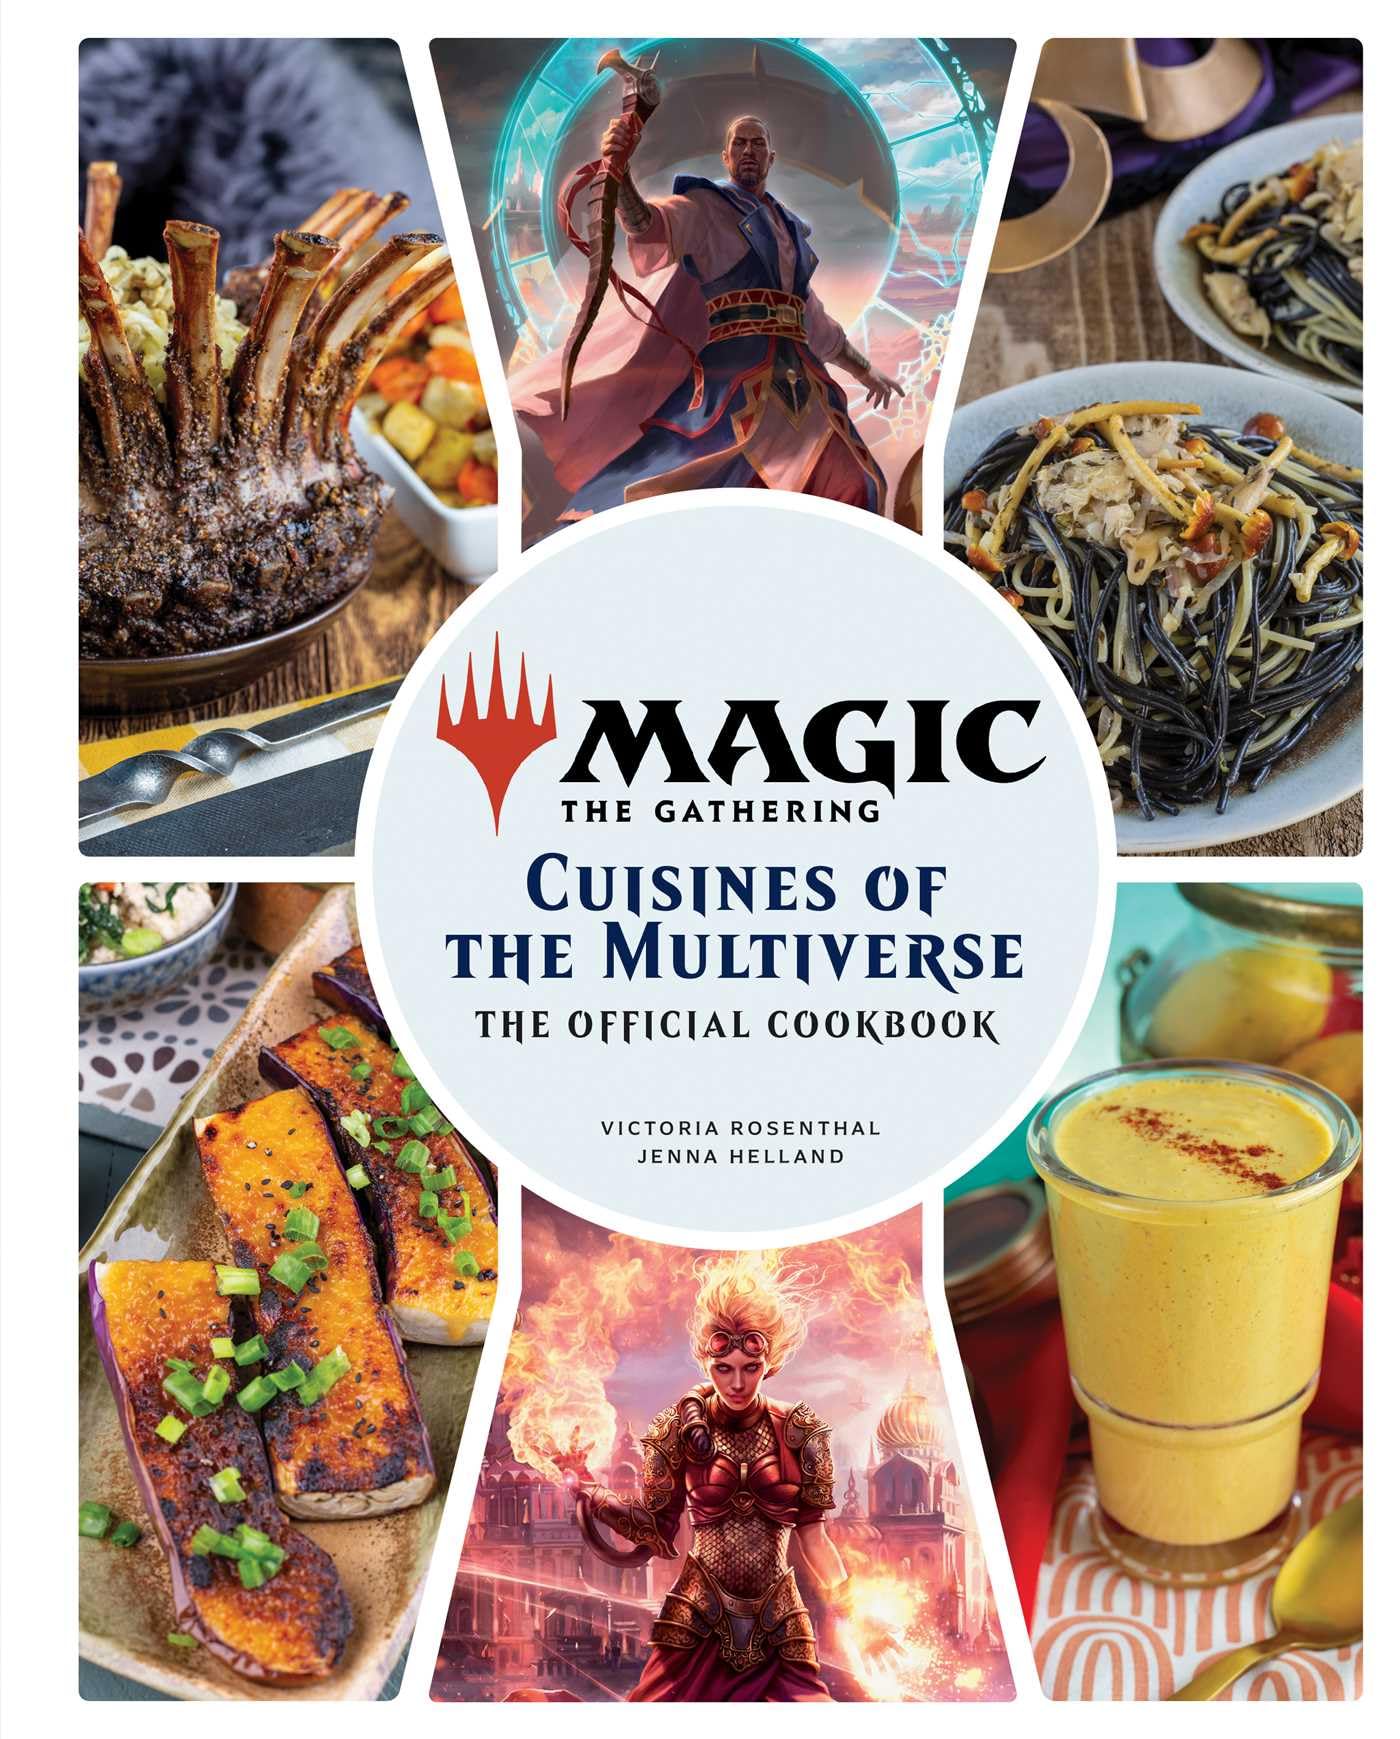 Magic: The Gathering: The Official Cookbook: Cuisines of the Multiverse (Gaming)